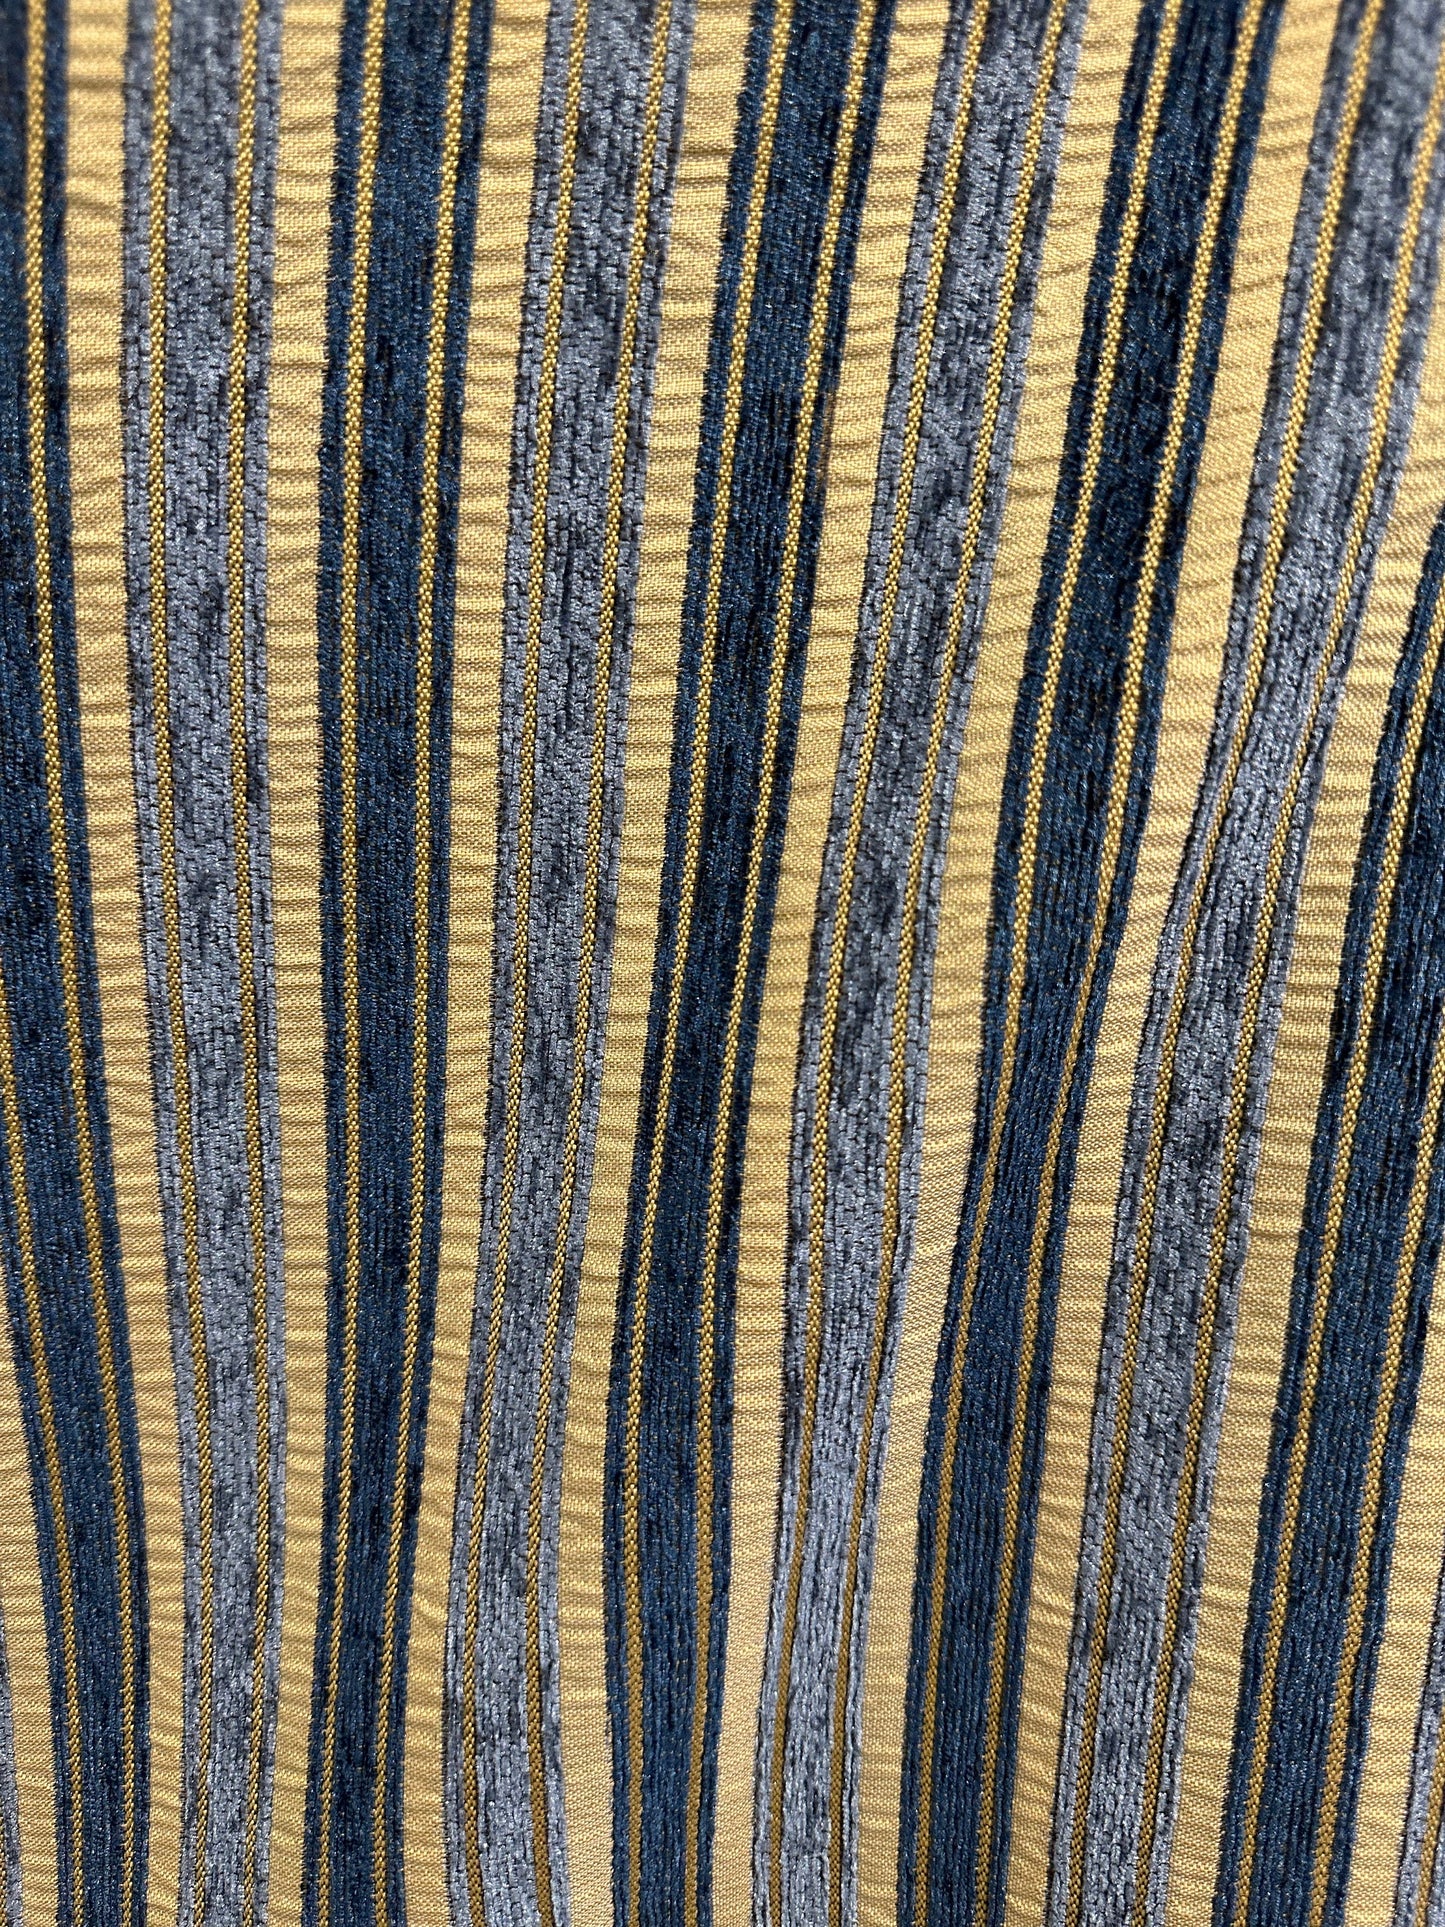 BLUE BEIGE Striped Chenille Upholstery Brocade Fabric (56 in.) Sold By The Yard